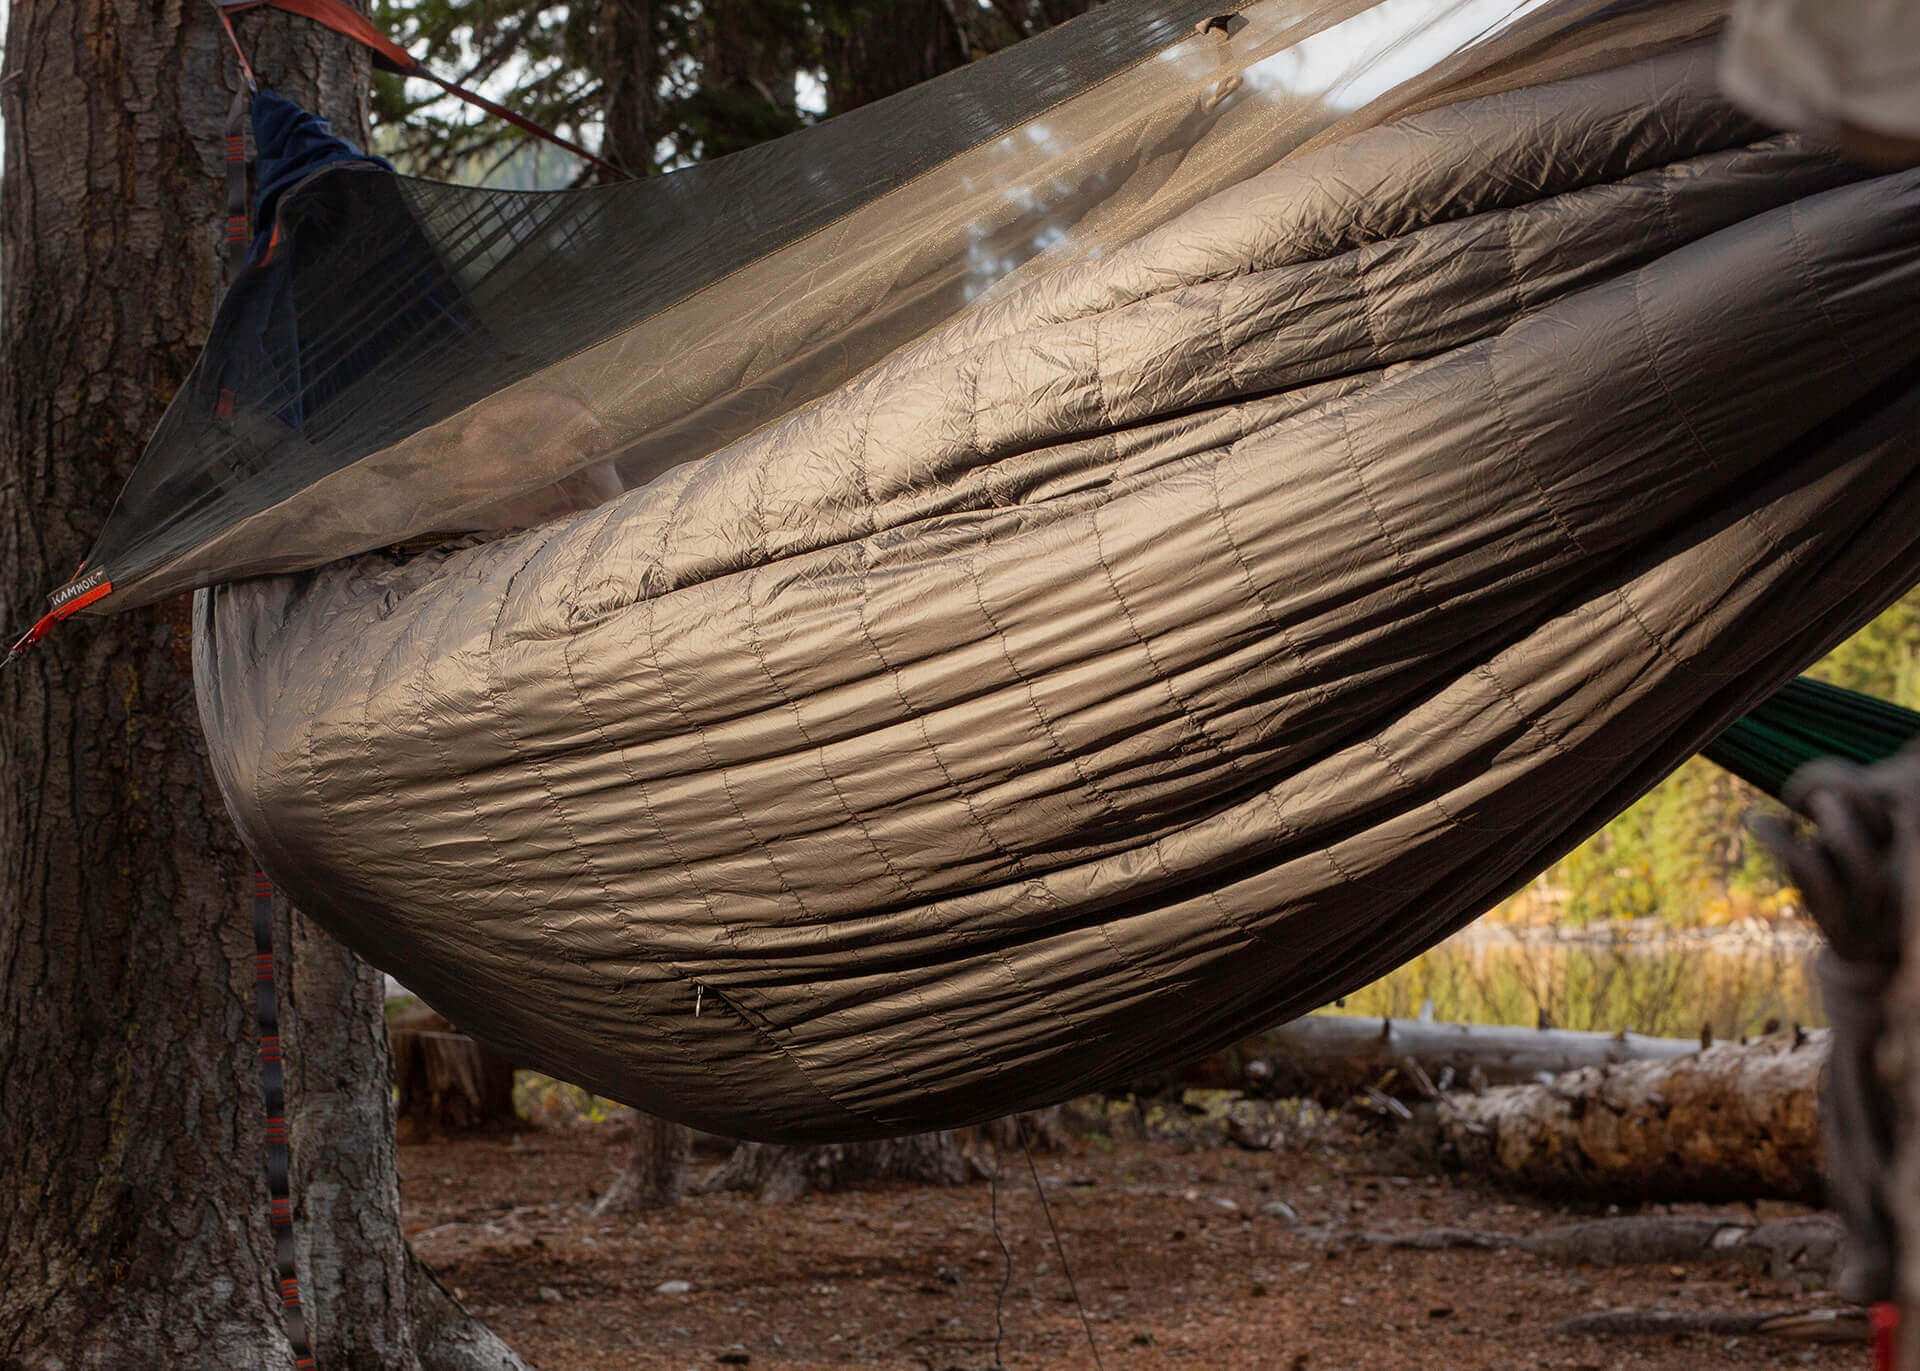 Kammok Firebelly 30 trail quilt in Granite Gray, attached to Mantis hammock in underquilt mode.